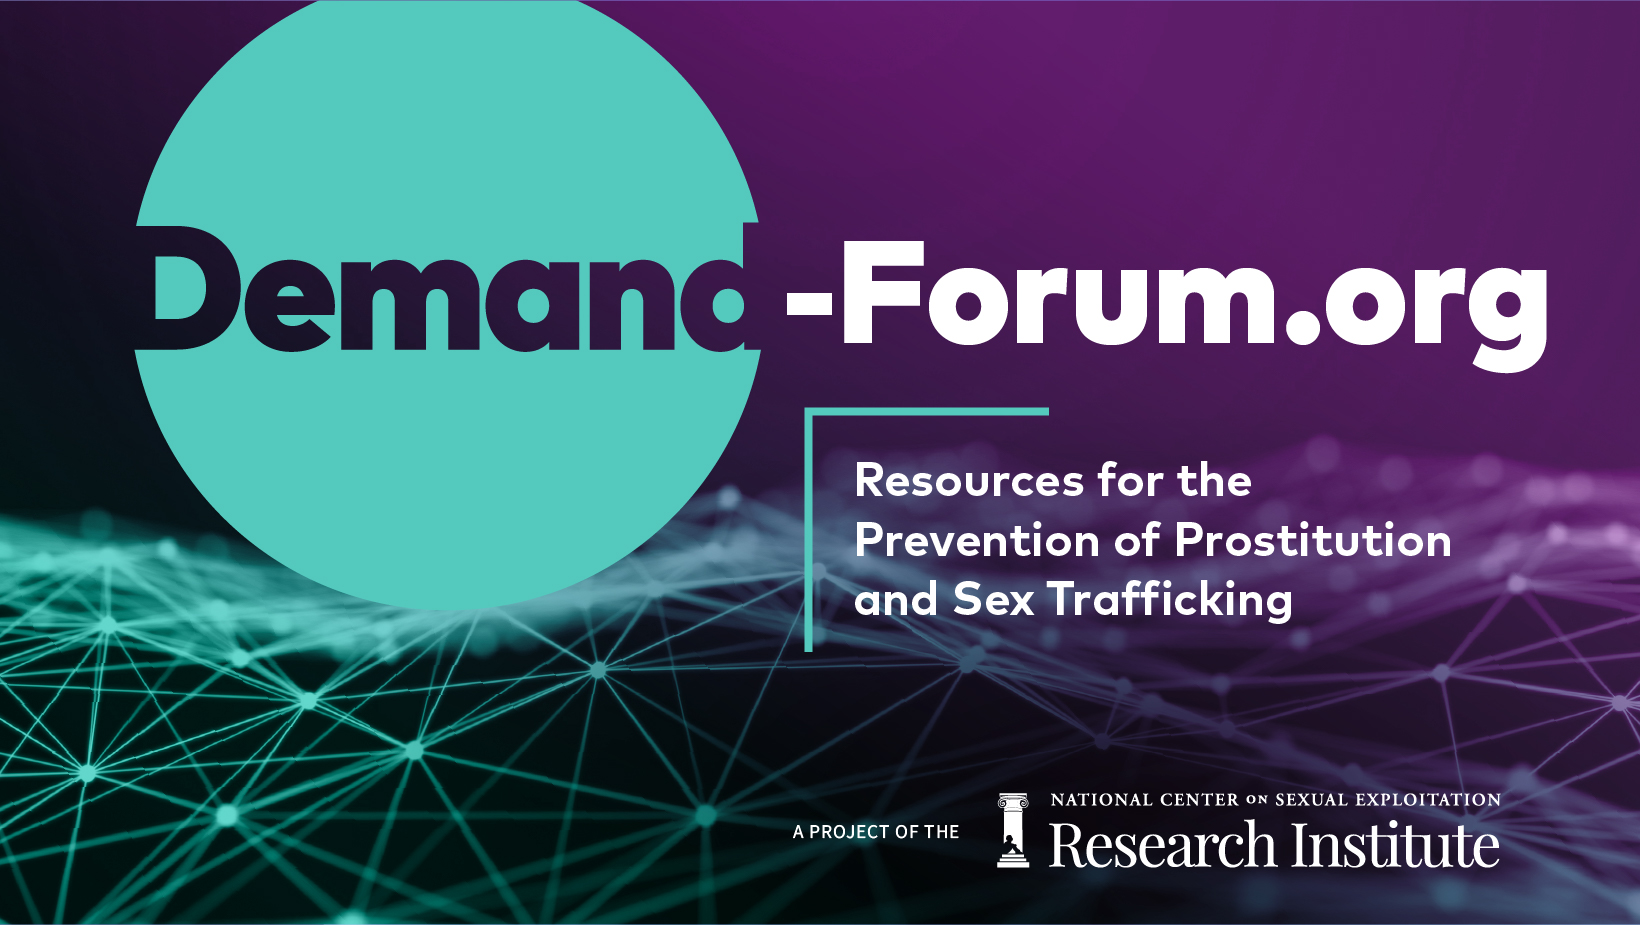 NCOSE Research Institute graphic for Demand Forum